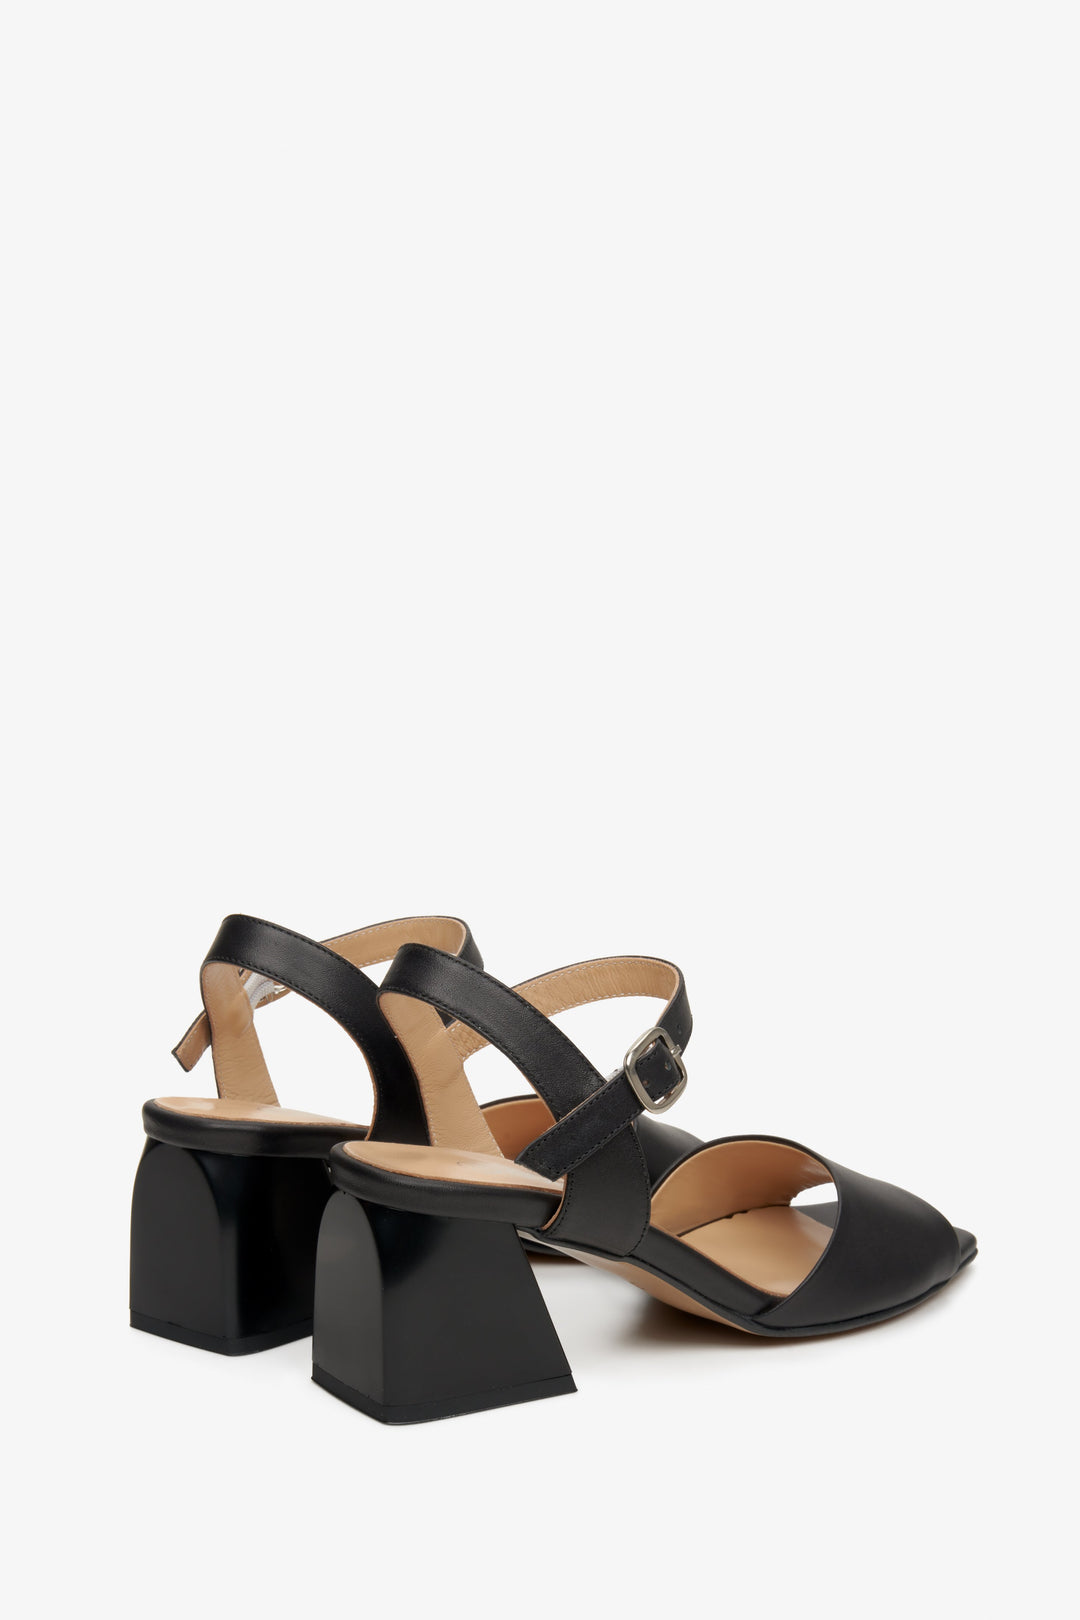 Women's black leather sandals by Estro - close-up on the block heel and side profile of the shoes.